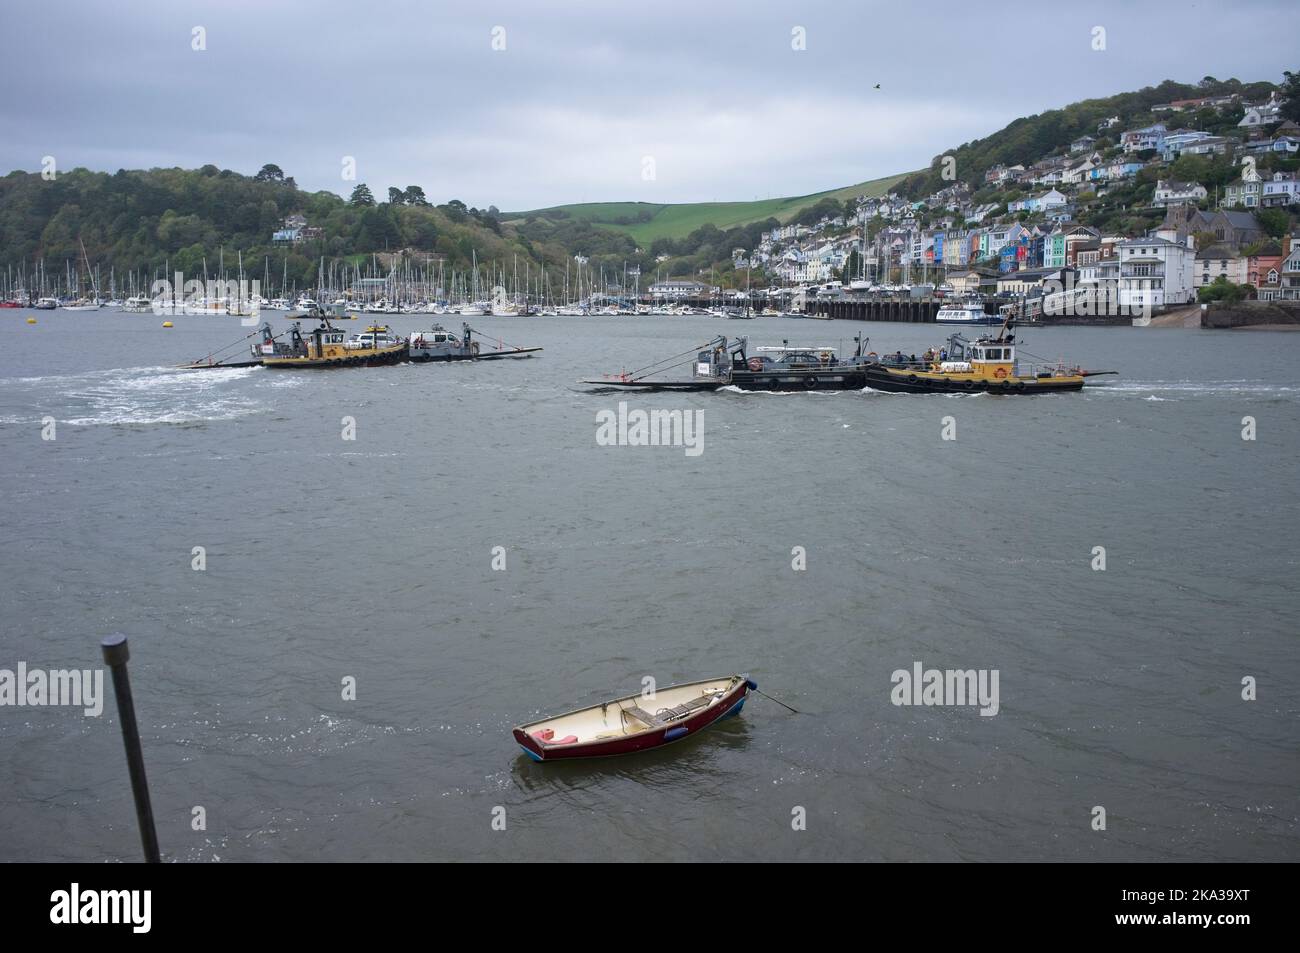 The Dartmouth-Kingswear vehicle ferry across the River Dart. Stock Photo